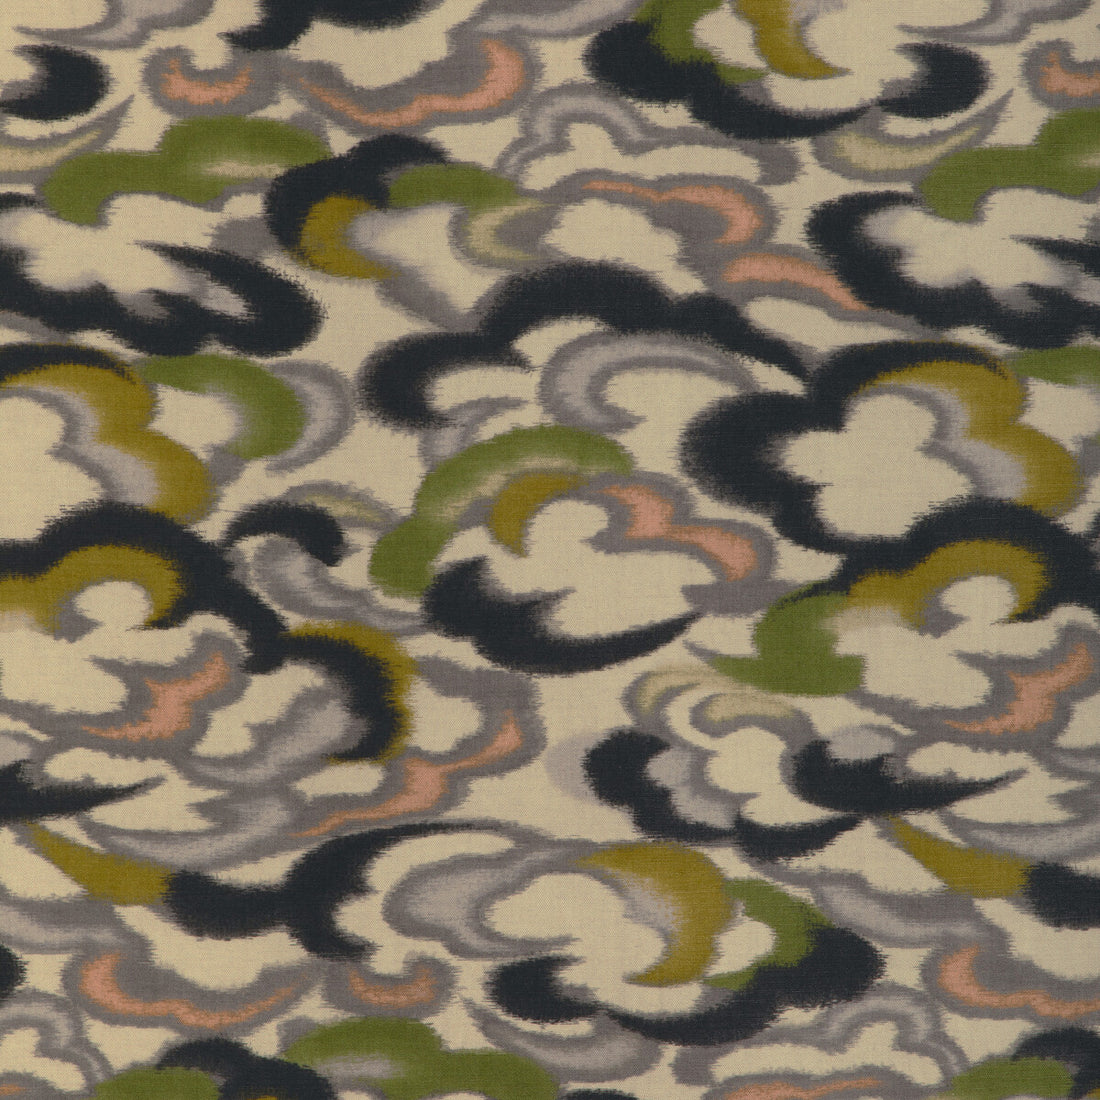 Stratus Print fabric in peridot/gold color - pattern 8023138.34.0 - by Brunschwig &amp; Fils in the Celeste collection